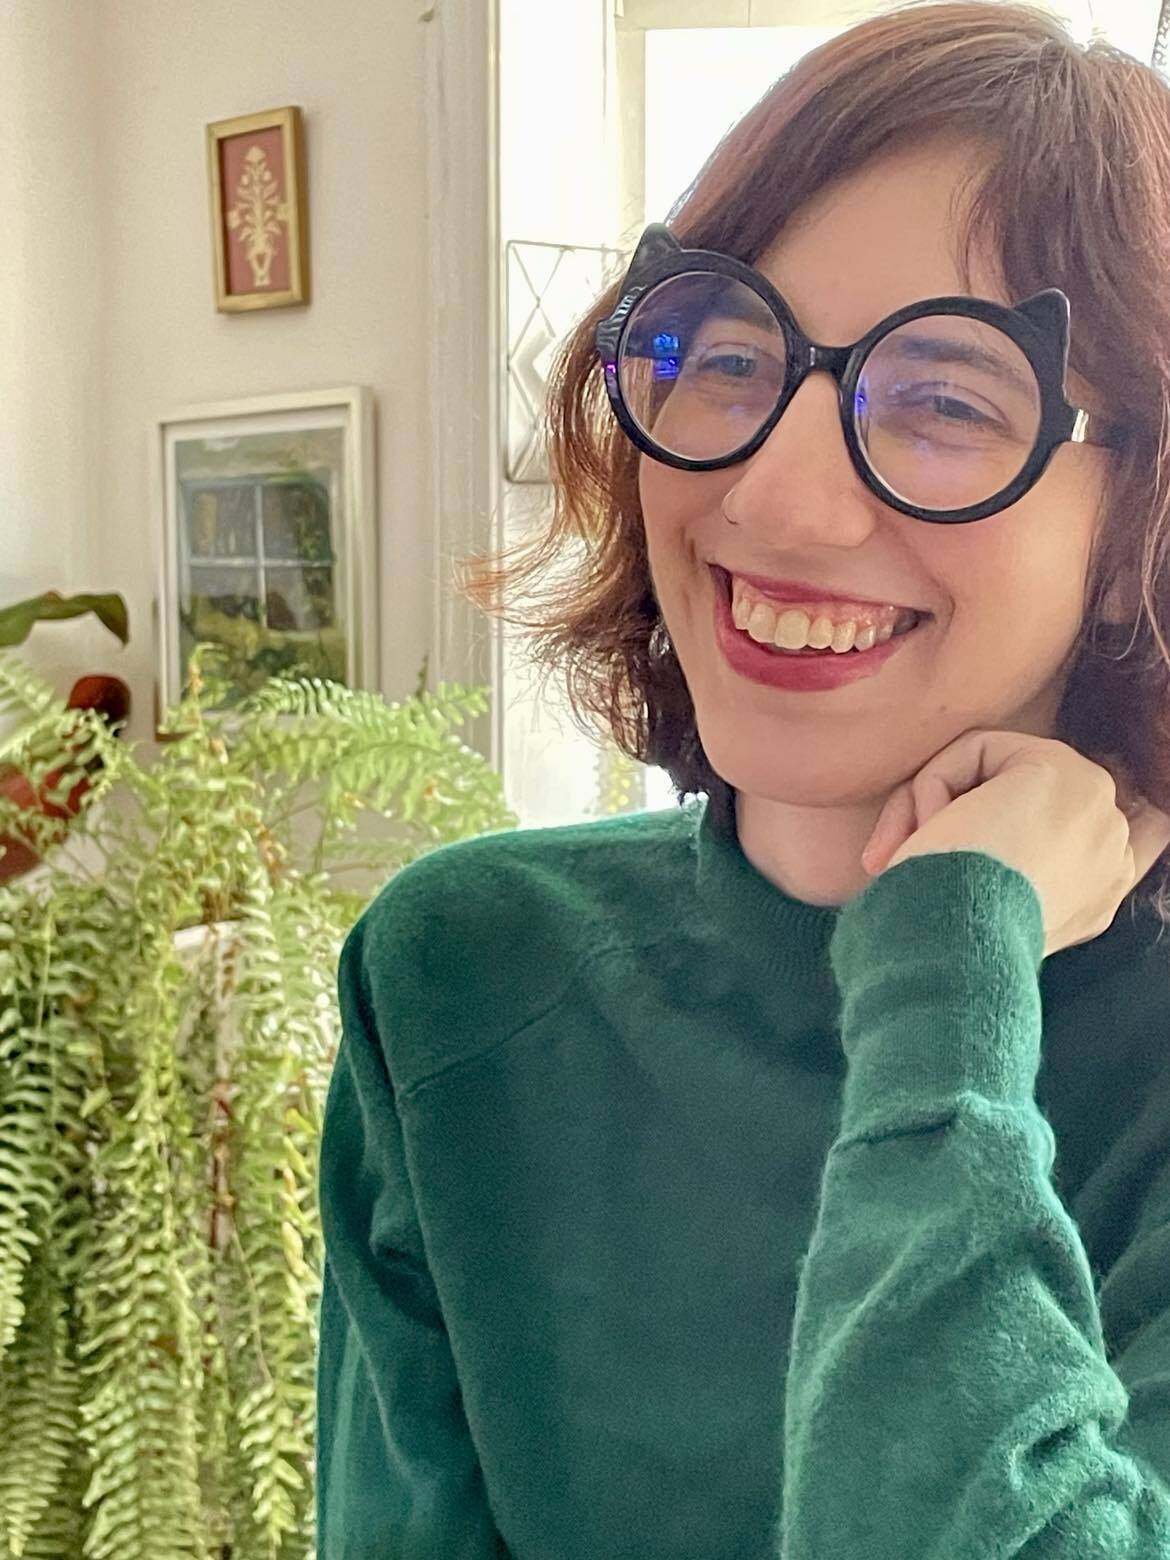 This lovely woman of european ancestry wears cat-rimmed glasses and a huge smile. She is engaged in conversation with a rather large indoor fern on the topic of plant representation in anime.